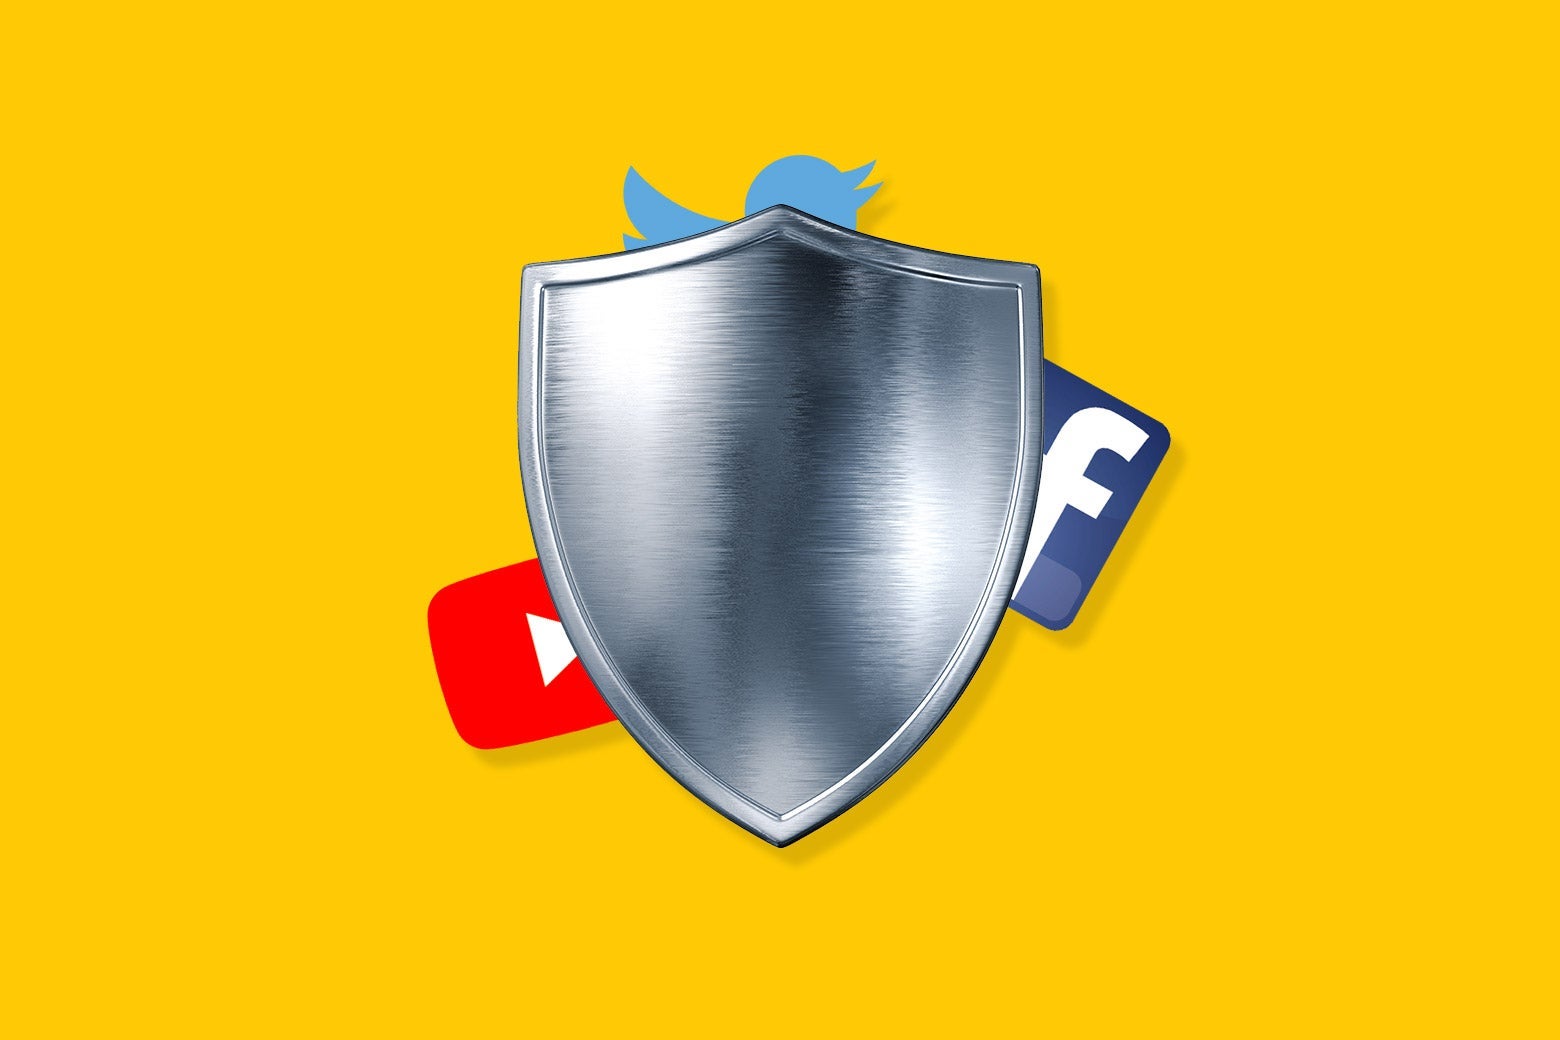 The Facebook, Twitter, and YouTube logos hide behind a shield.